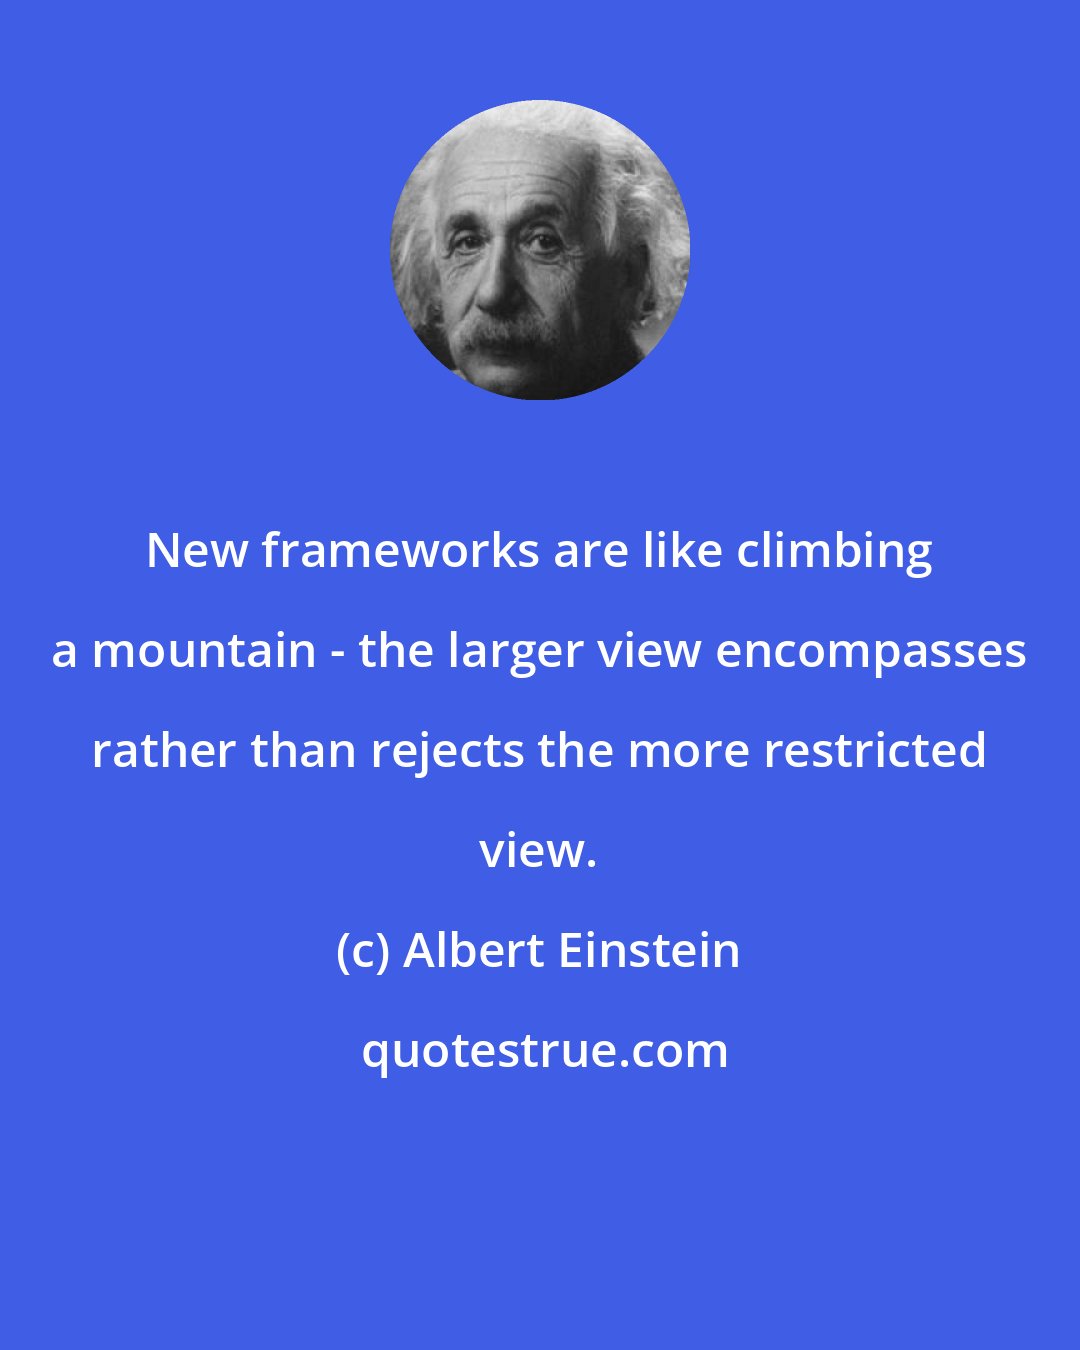 Albert Einstein: New frameworks are like climbing a mountain - the larger view encompasses rather than rejects the more restricted view.